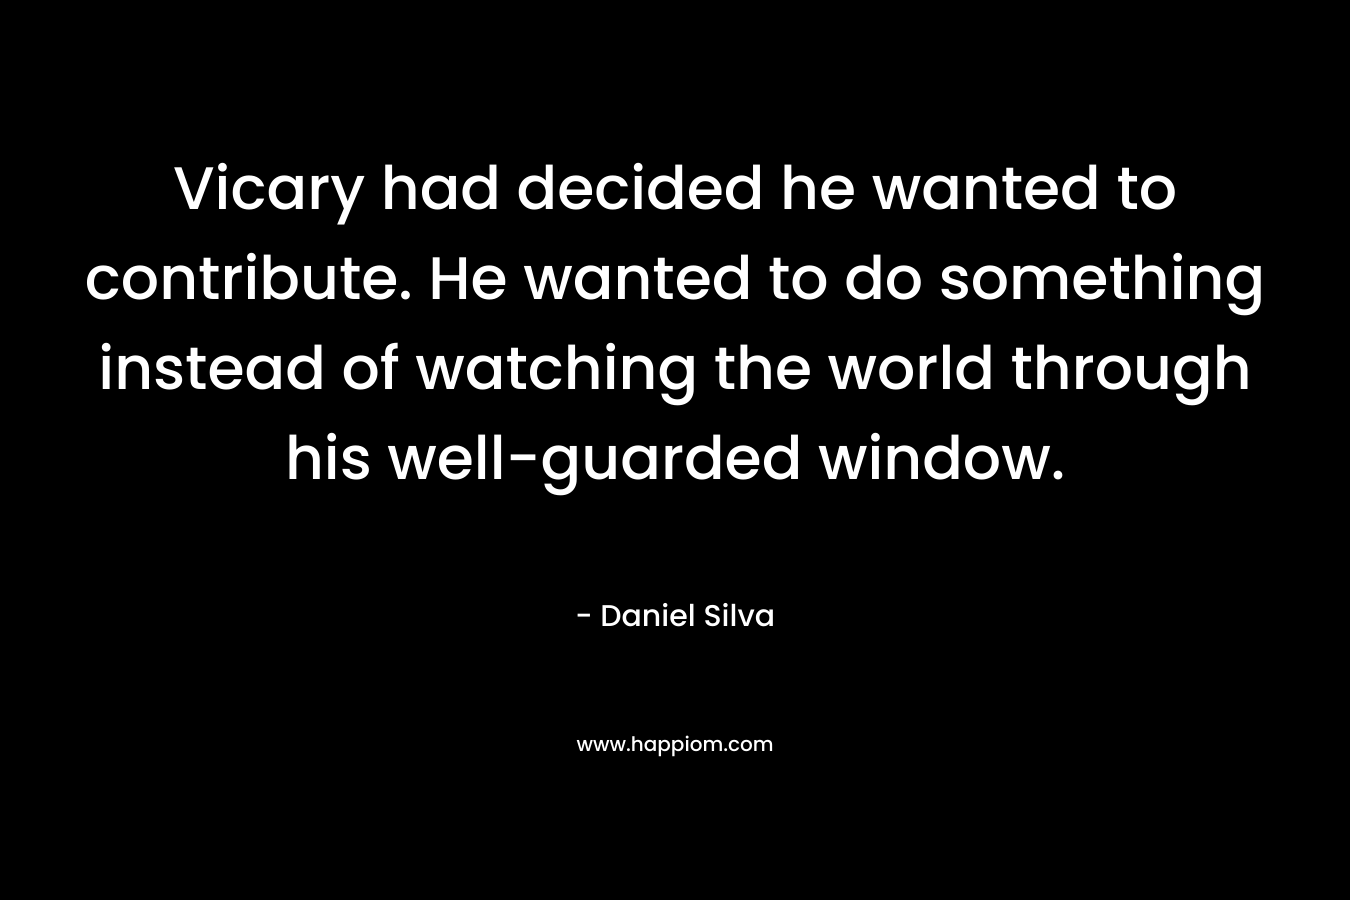 Vicary had decided he wanted to contribute. He wanted to do something instead of watching the world through his well-guarded window. – Daniel Silva